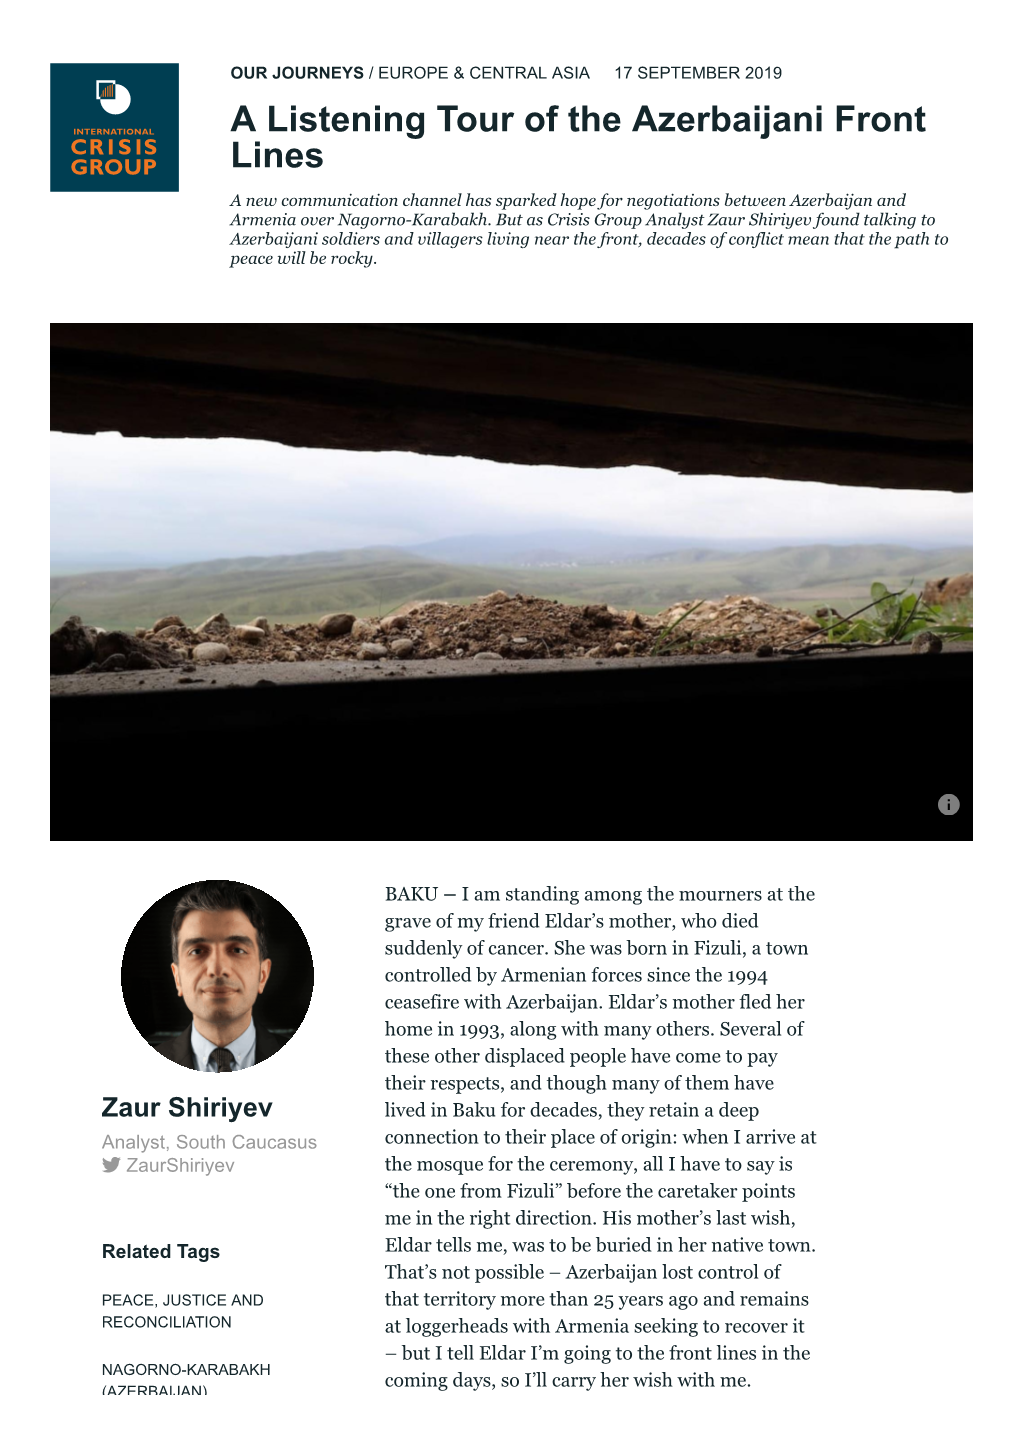 A Listening Tour of the Azerbaijani Front Lines